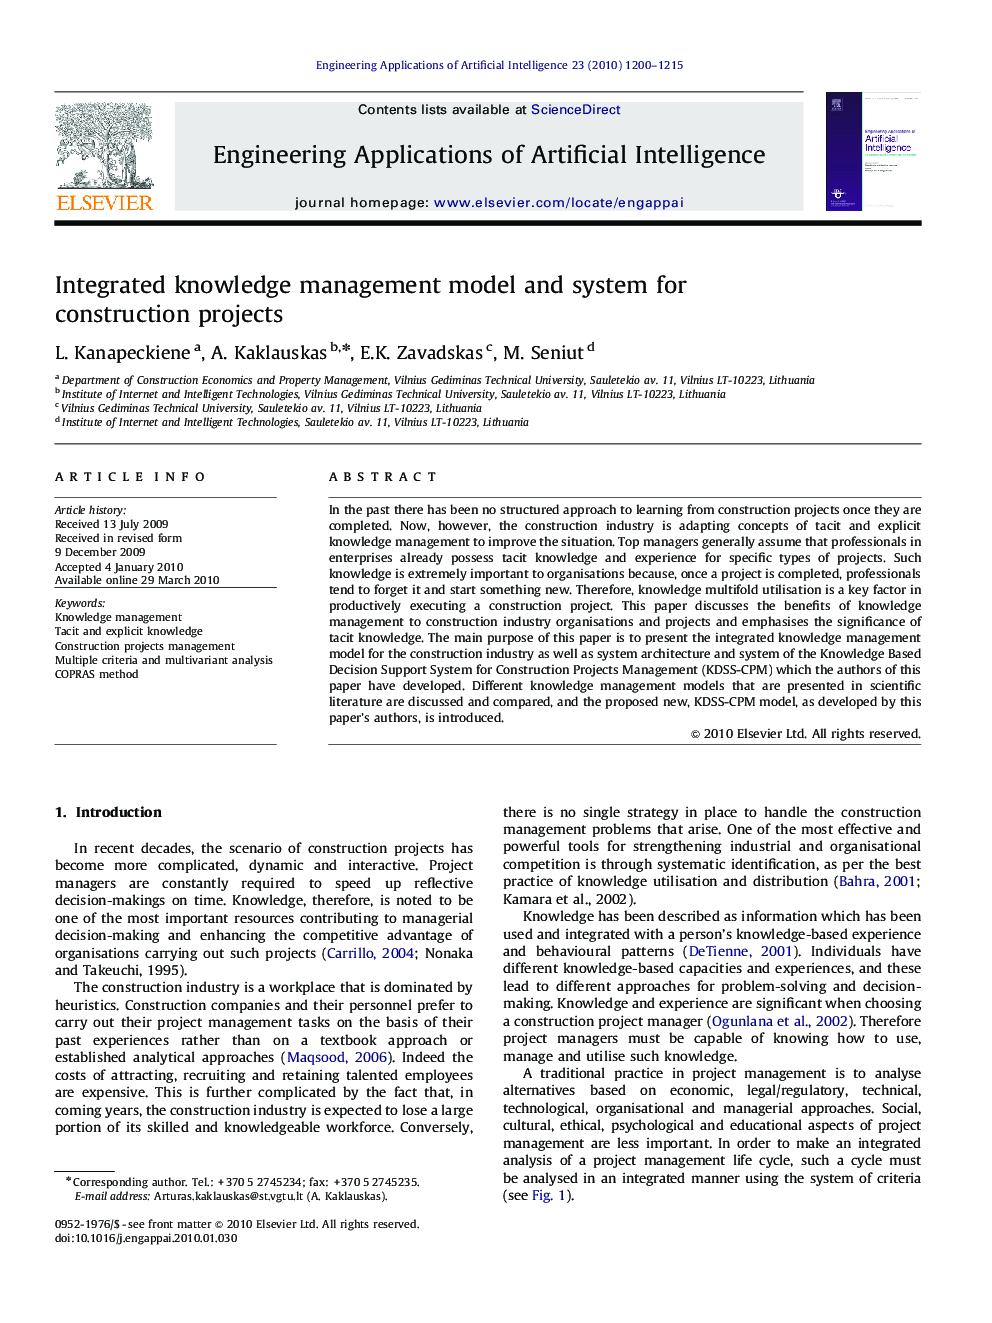 Integrated knowledge management model and system for construction projects